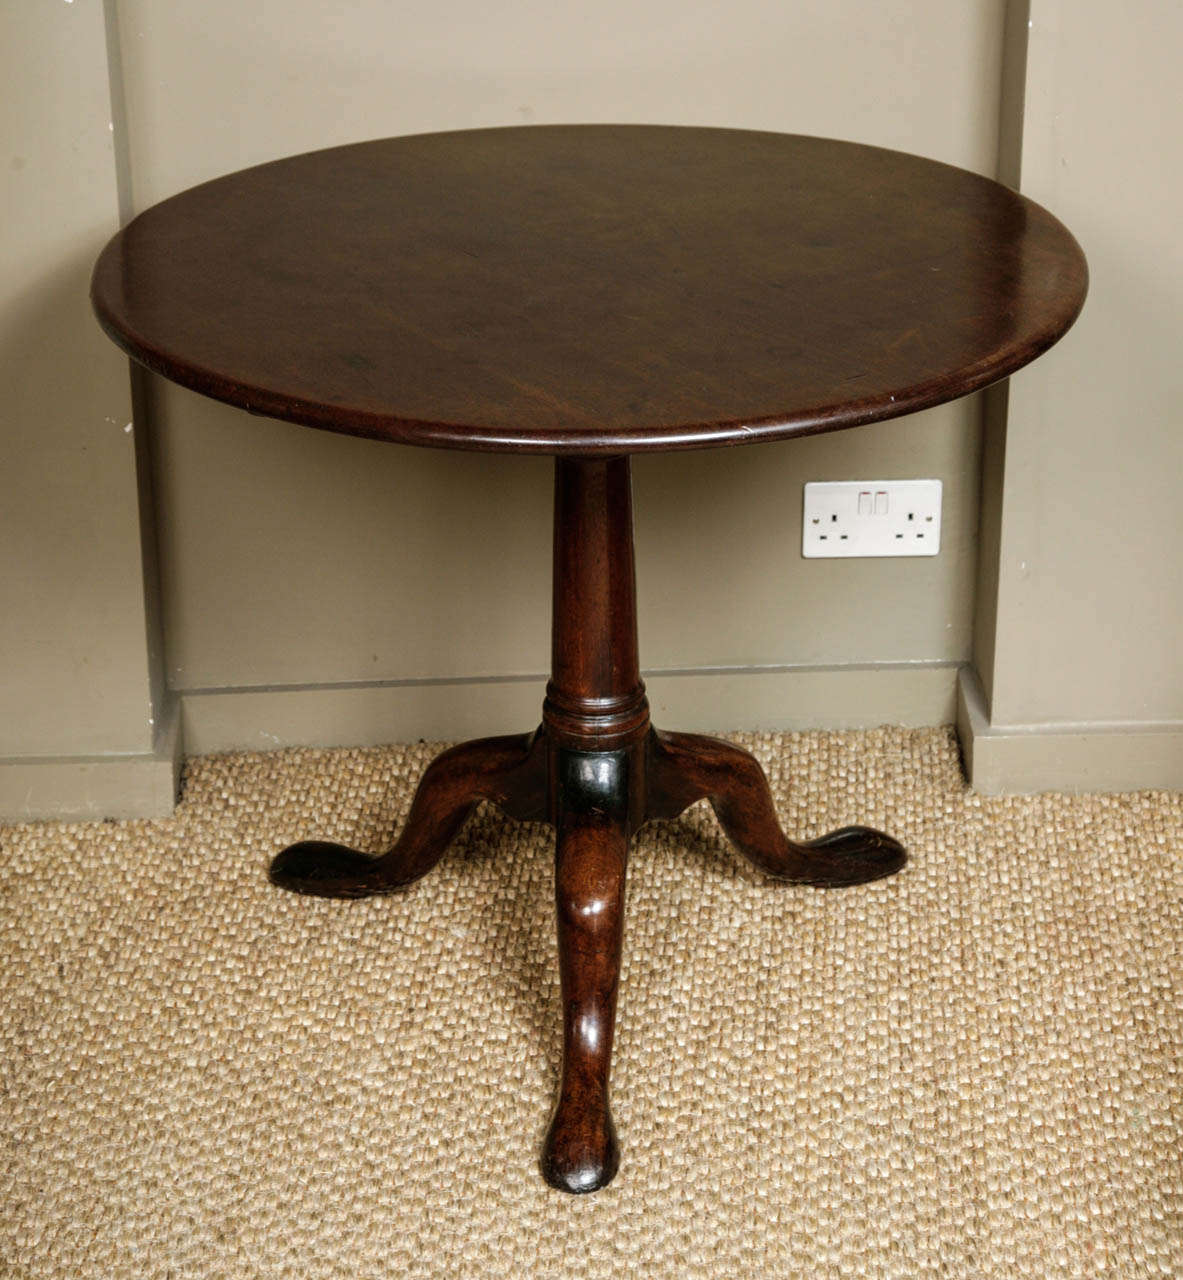 Very solid and heavy George II Cuban mahogany tripod table with 'brid cage' action tilting mechanism. Solid one piece top on revolving turned barrel birdcage and gun barrel turned pedestal, shaped cabriole legs and large flat pad feet. Nice colour